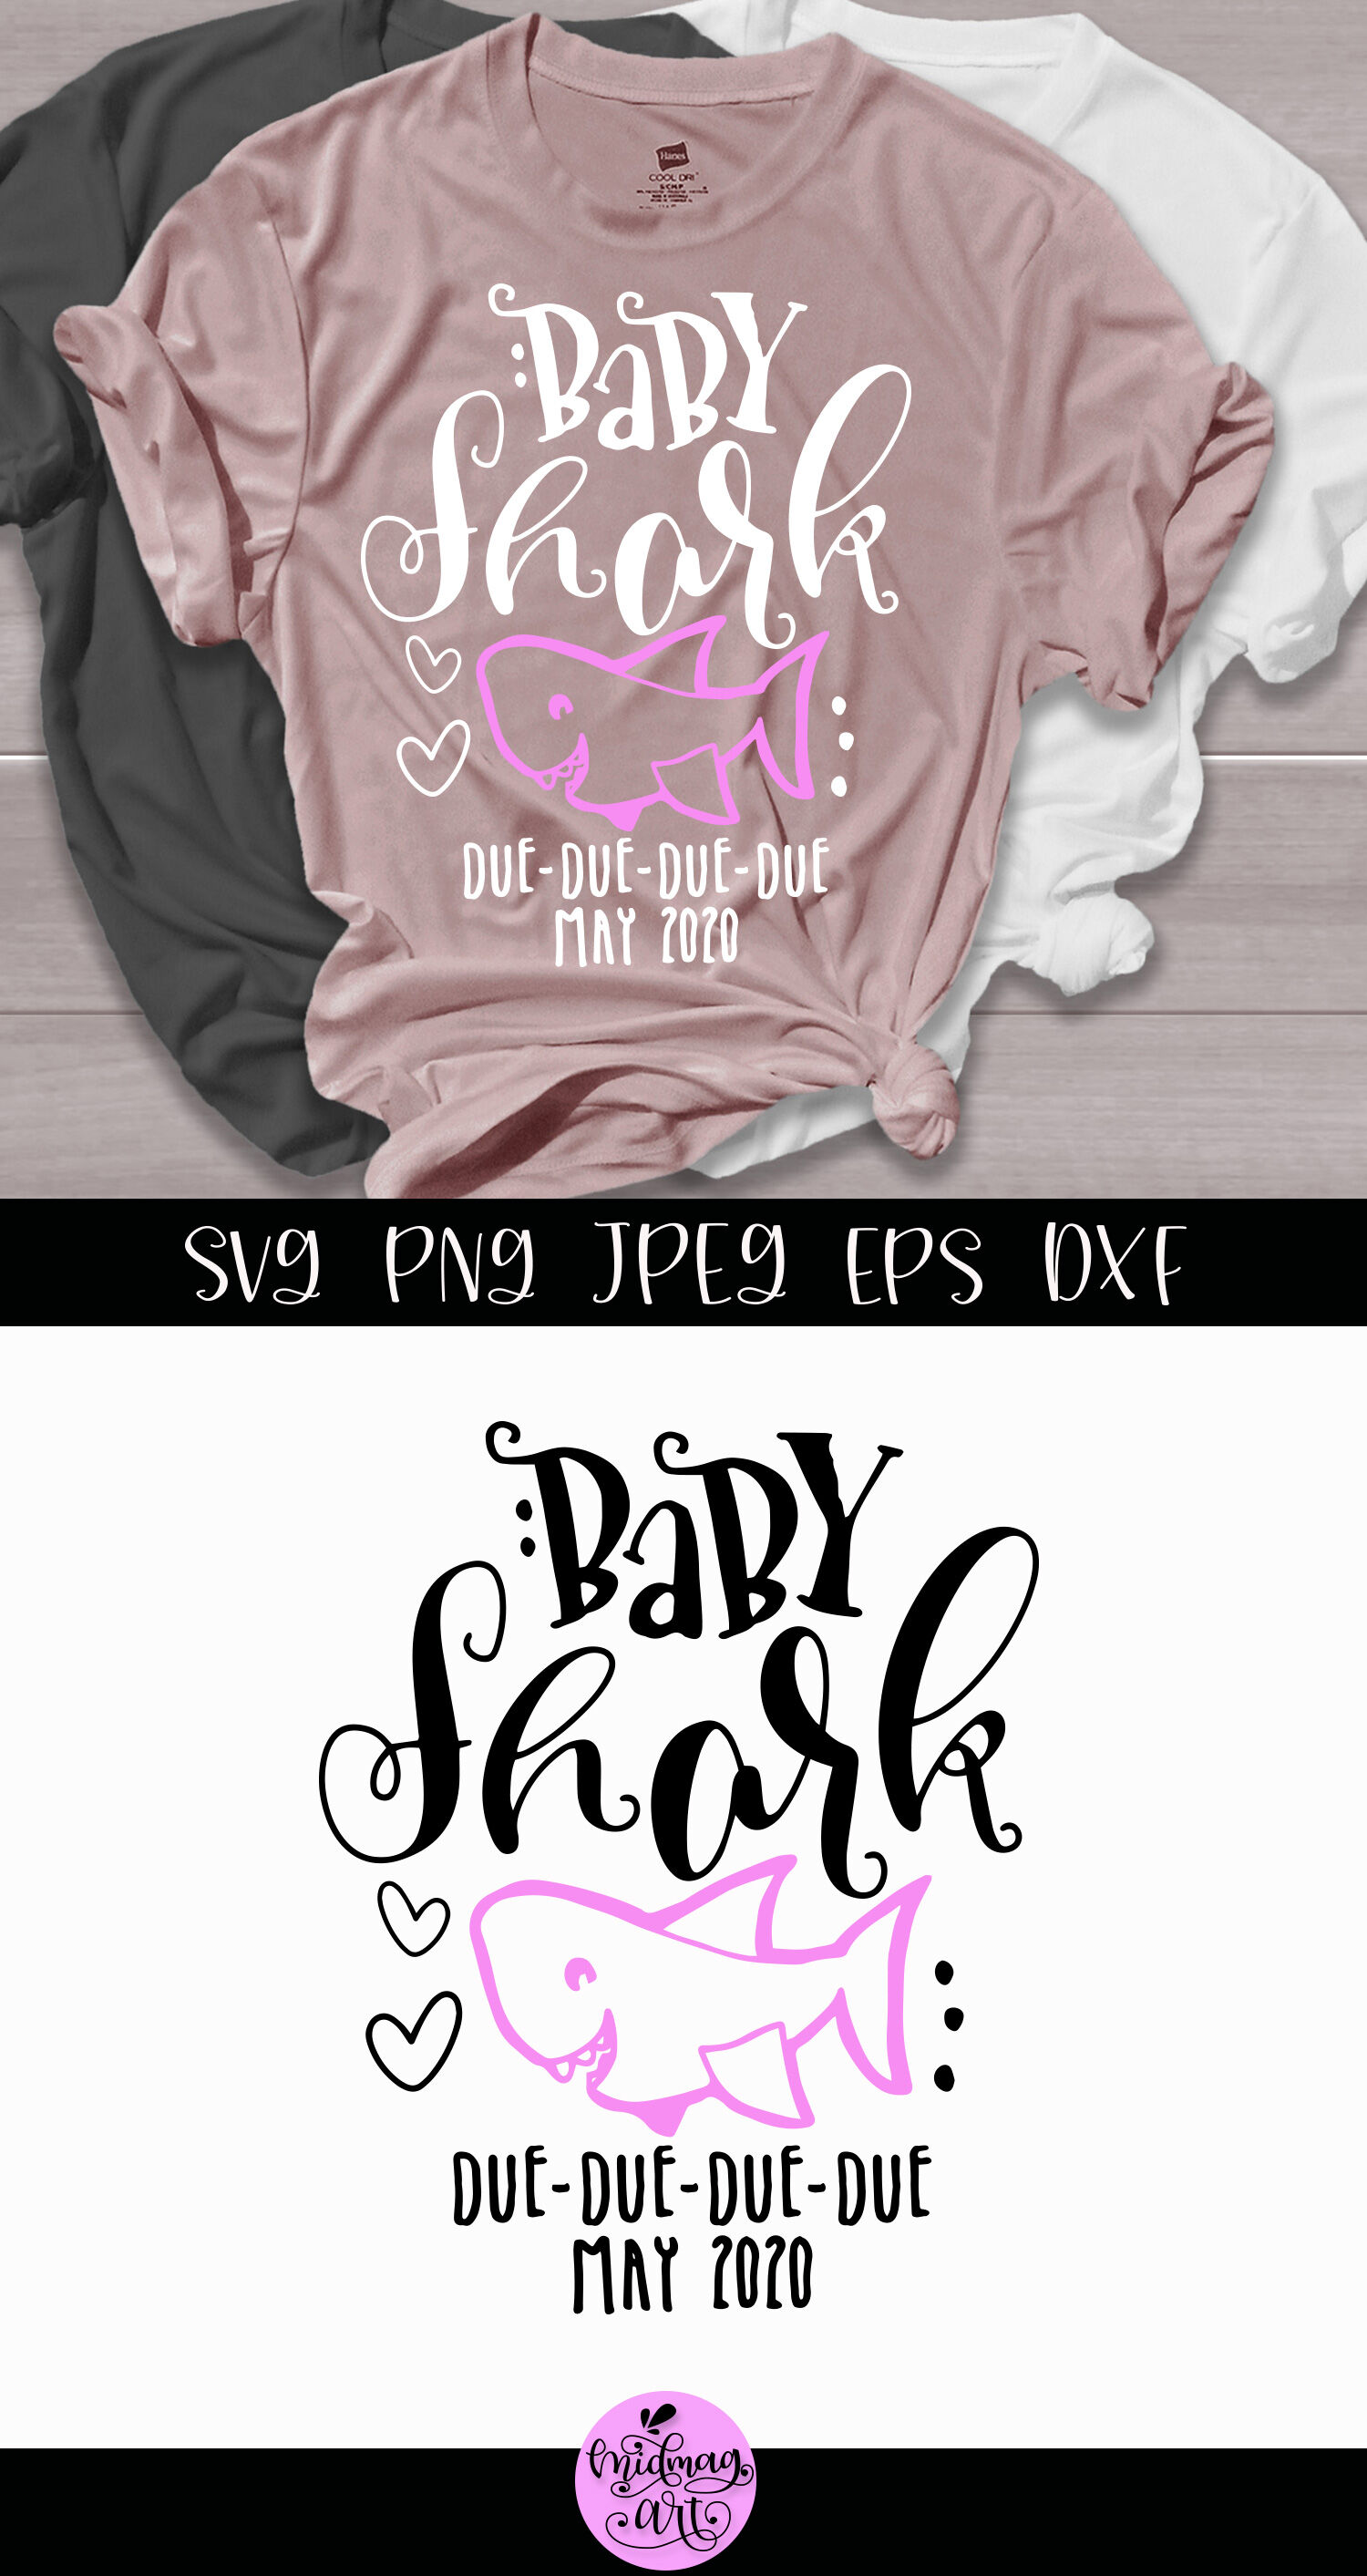 Baby shark due may svg, pregnancy shirt svg By Midmagart ...